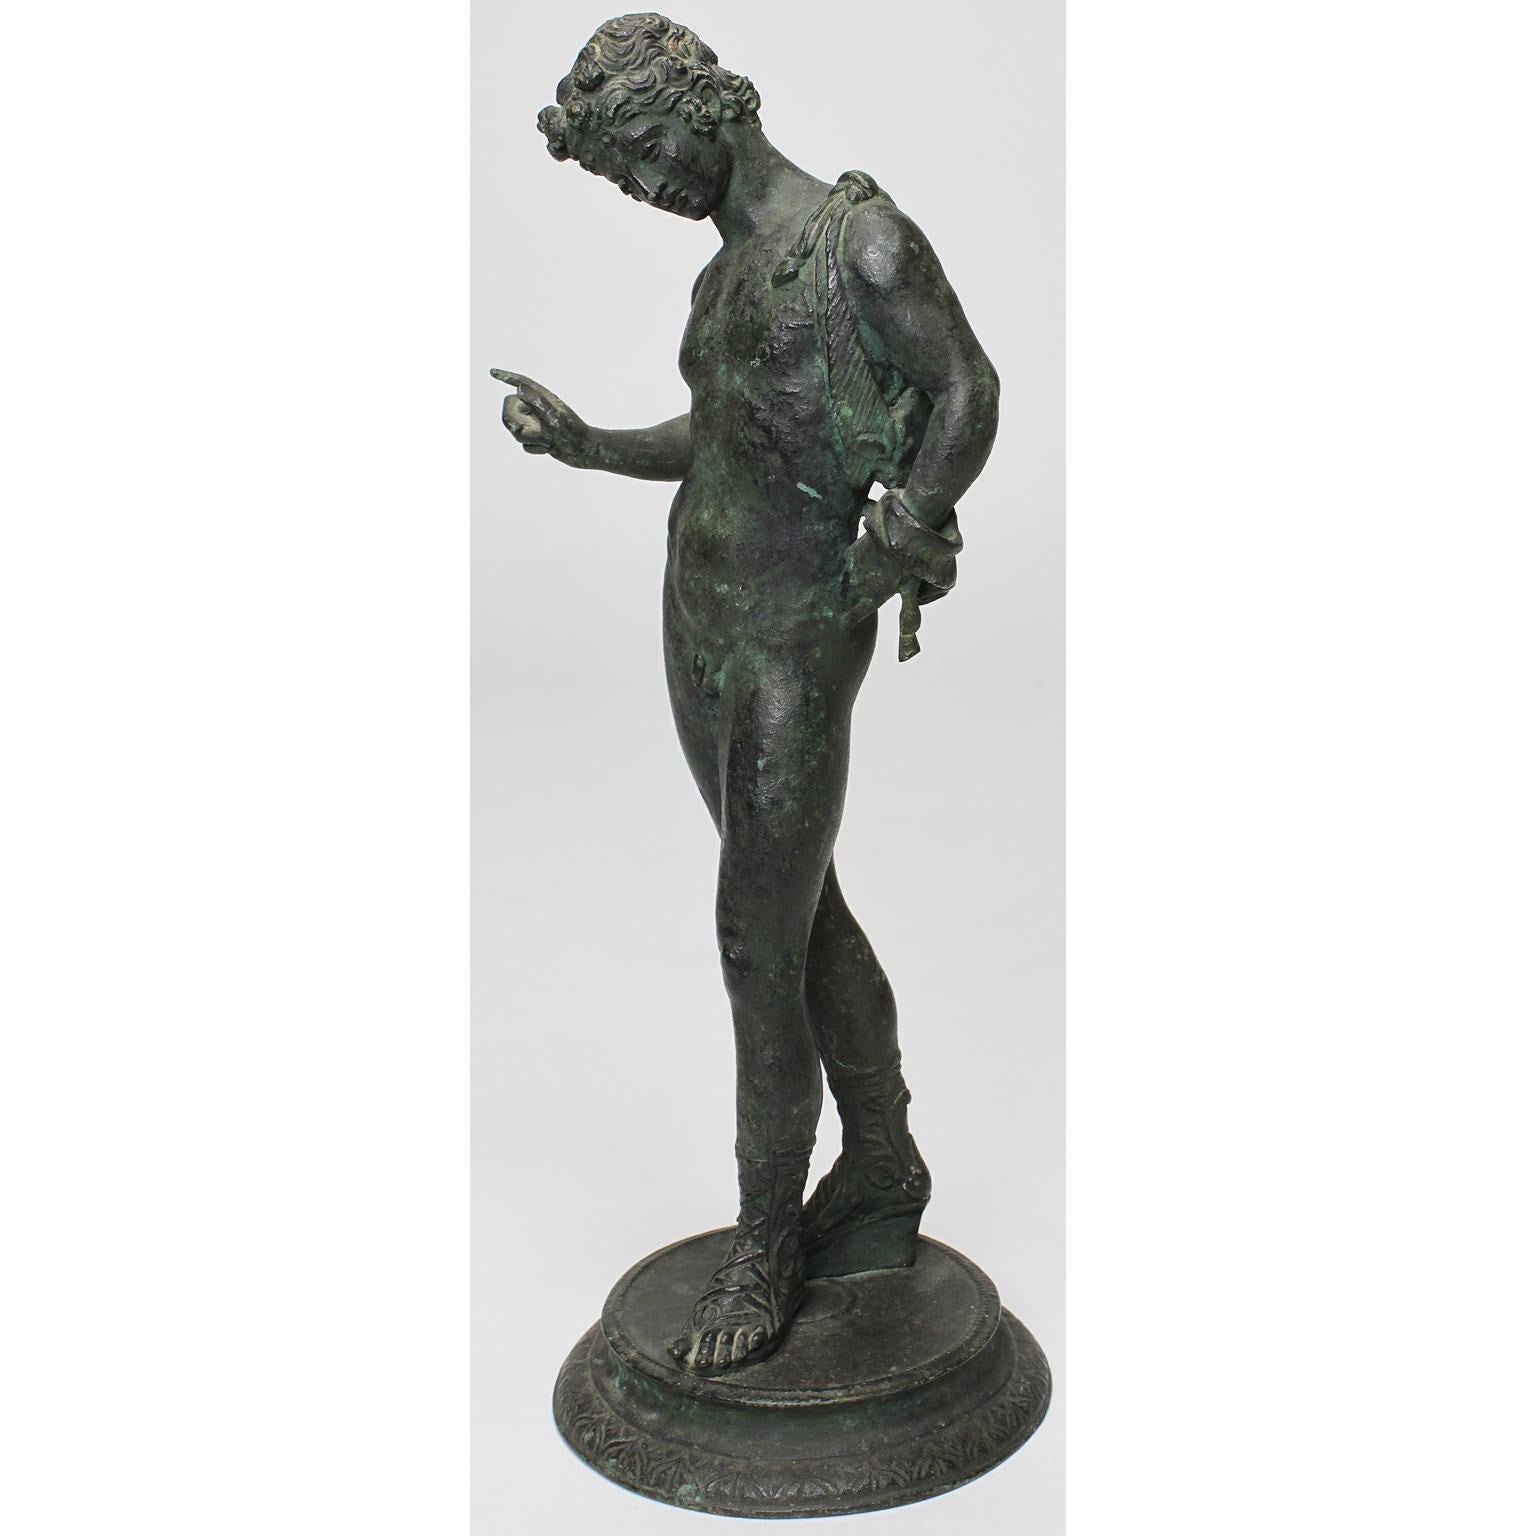 An Italian 19th century grand tour - Greco Roman bronze sculpture of Narcissus, after the original sculpture excavated in 1862 at Pompeii. The green patinated bronze figure of slender standing and posing nude man wearing Roman sandals, circa